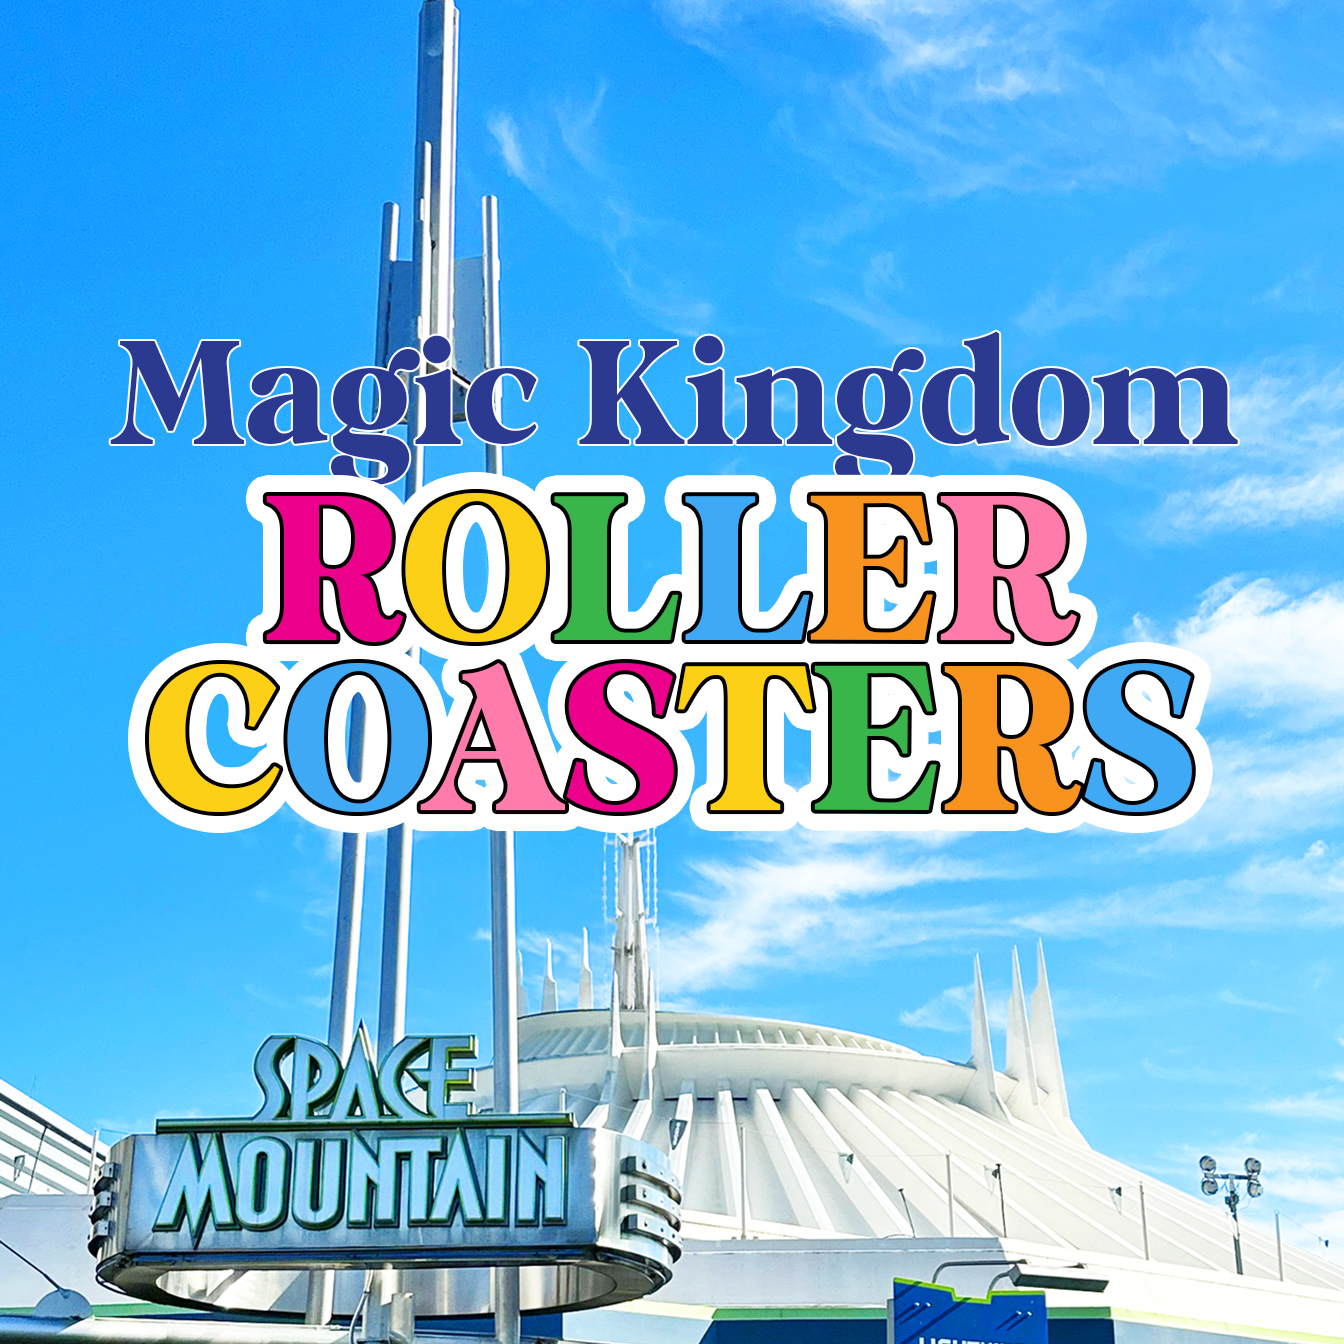 Does Magic Kingdom Have Any Roller Coasters?